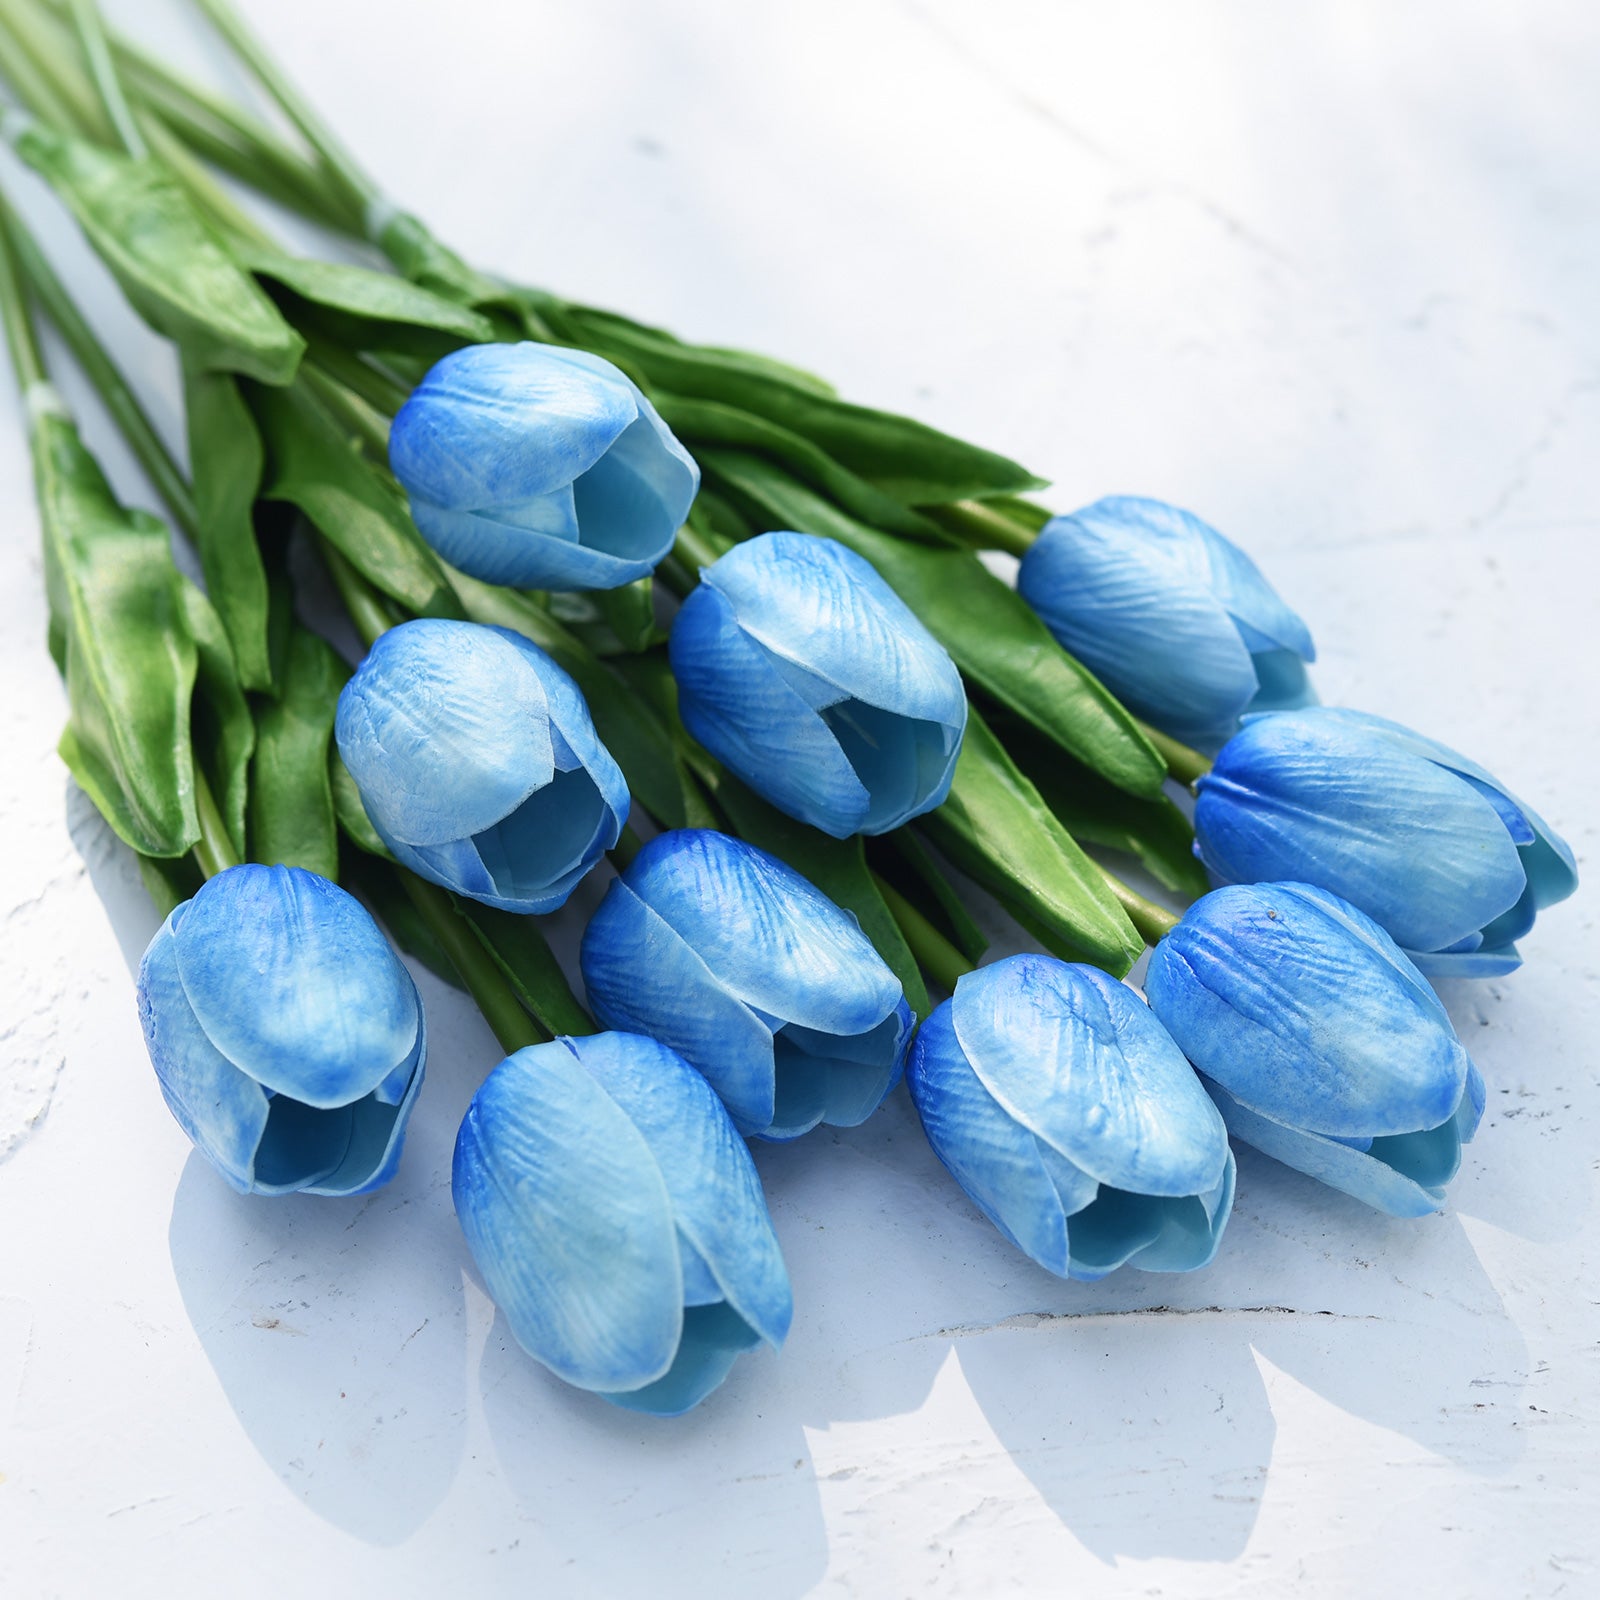 Blue Real Touch Tulips Artificial Flowers Bouquet 10 Stems